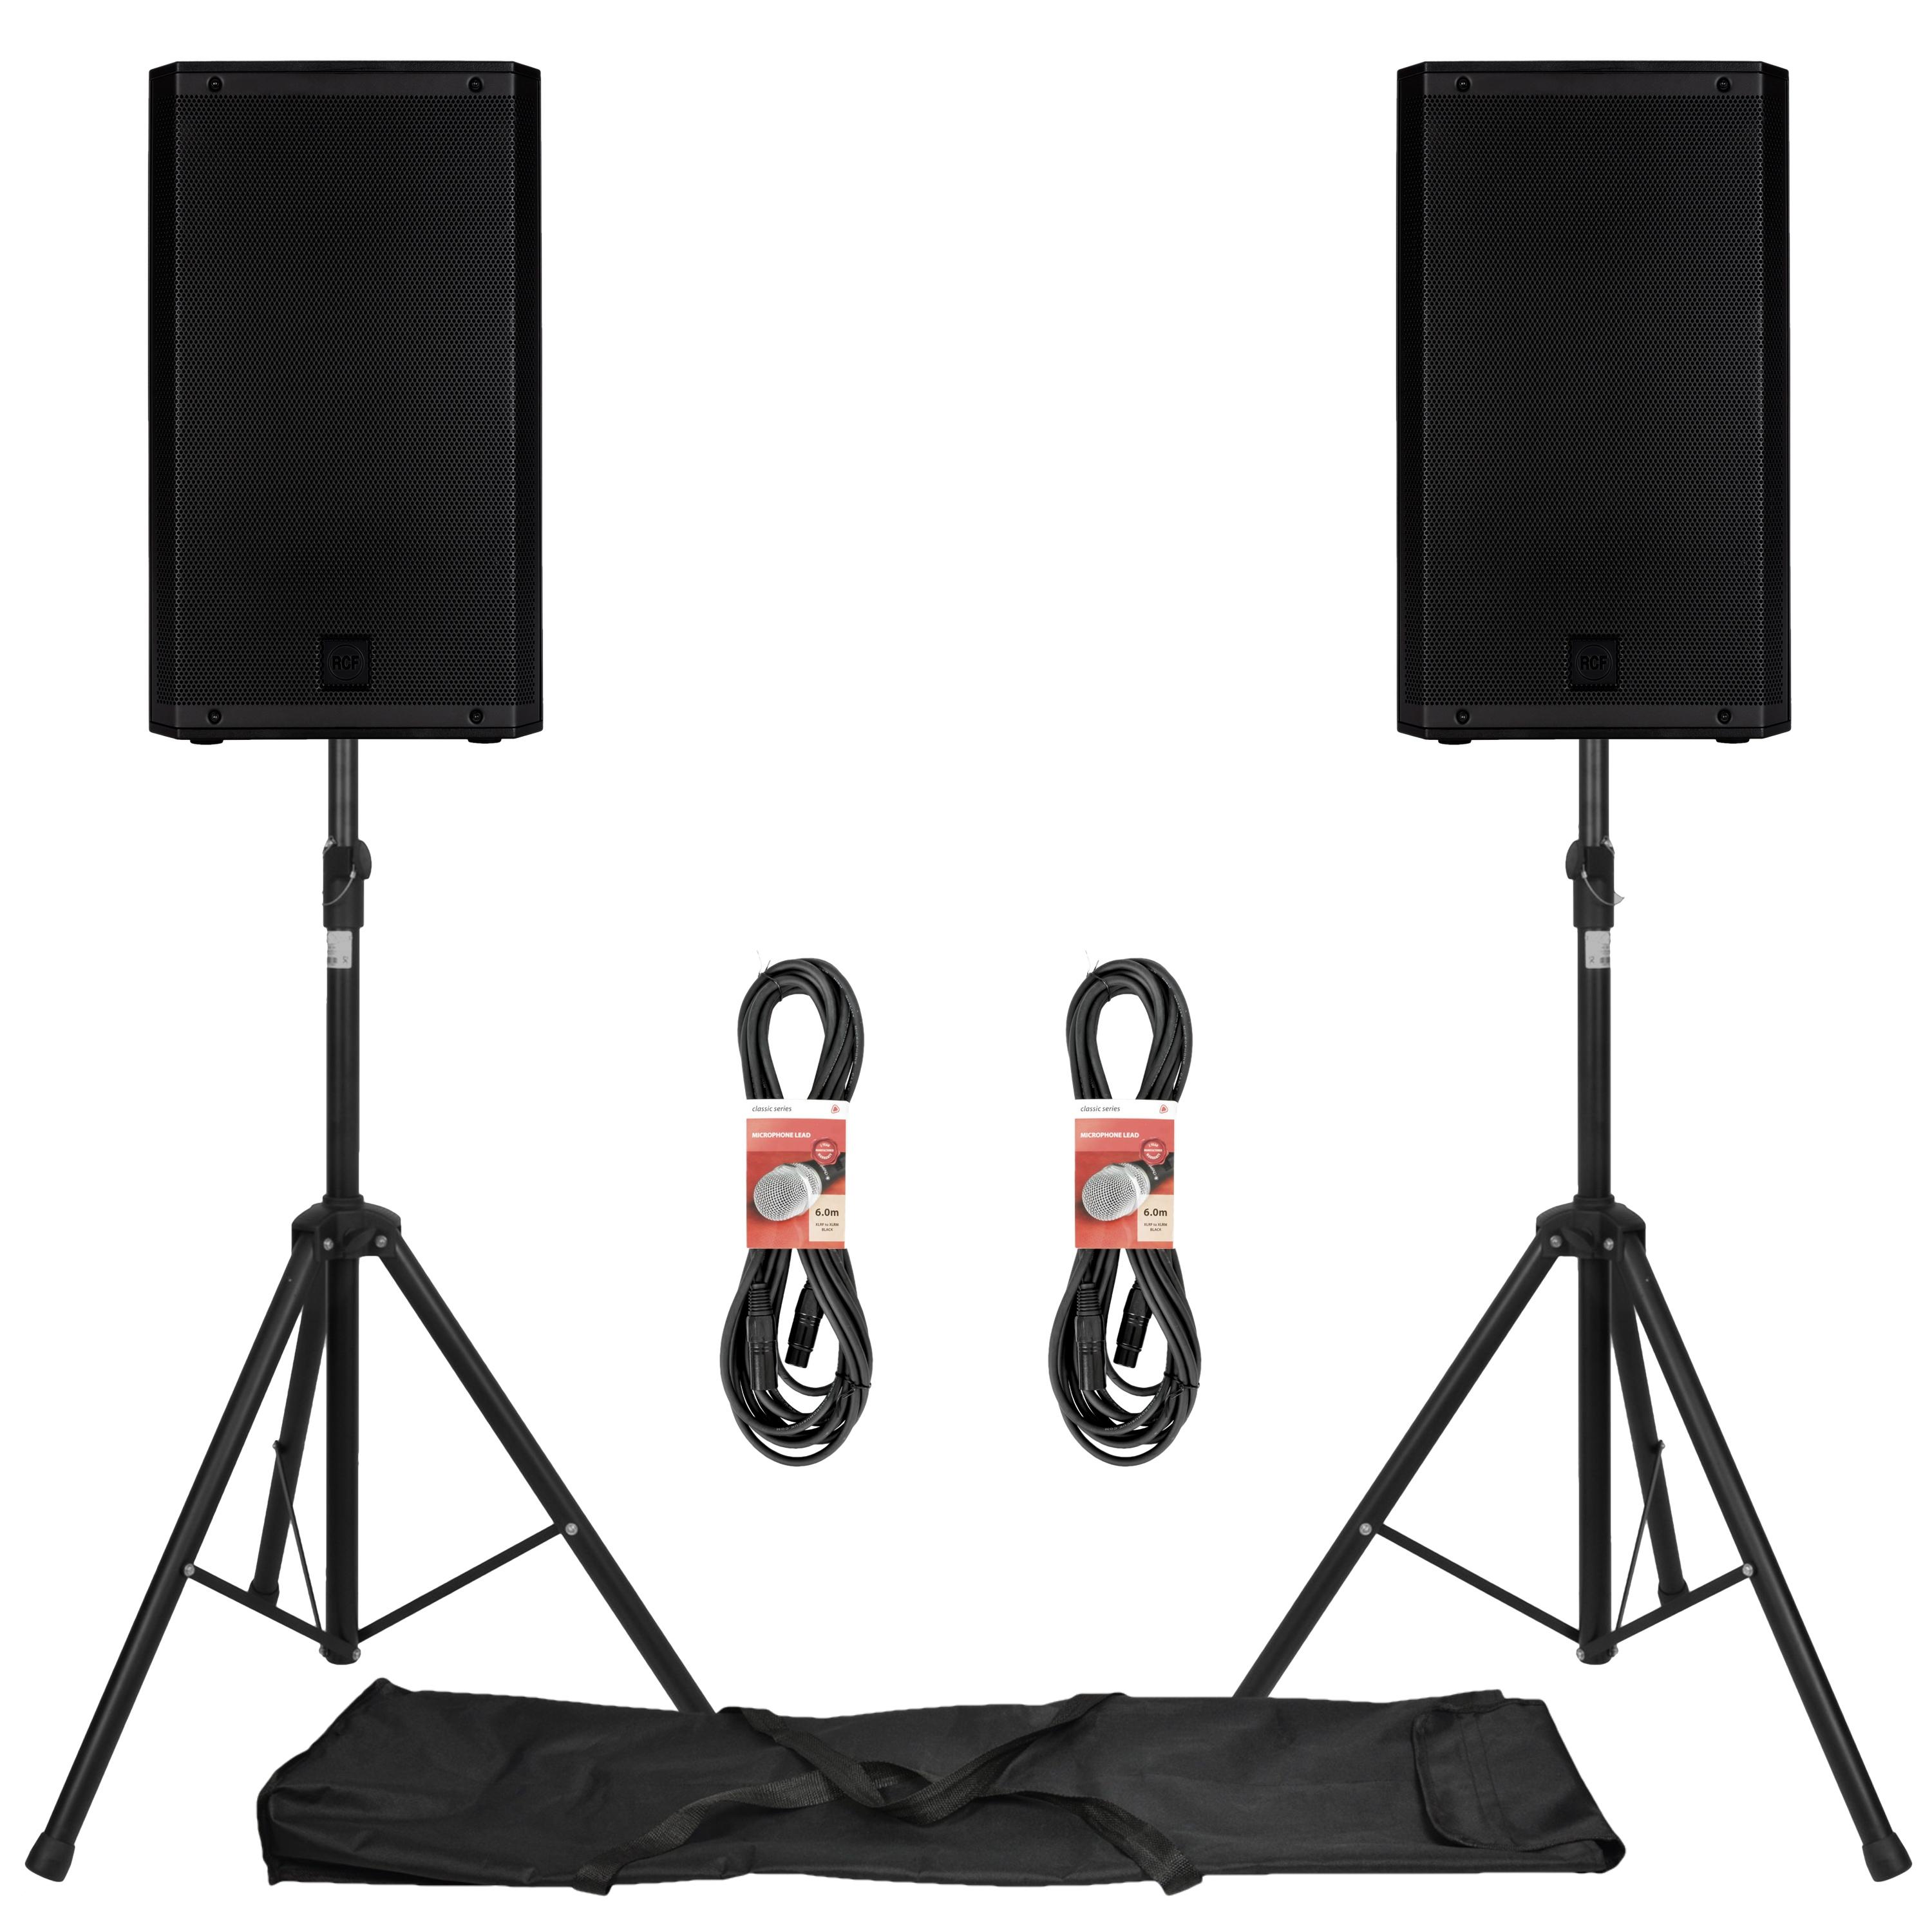 RCF ART 912-A Professional Active Speaker System